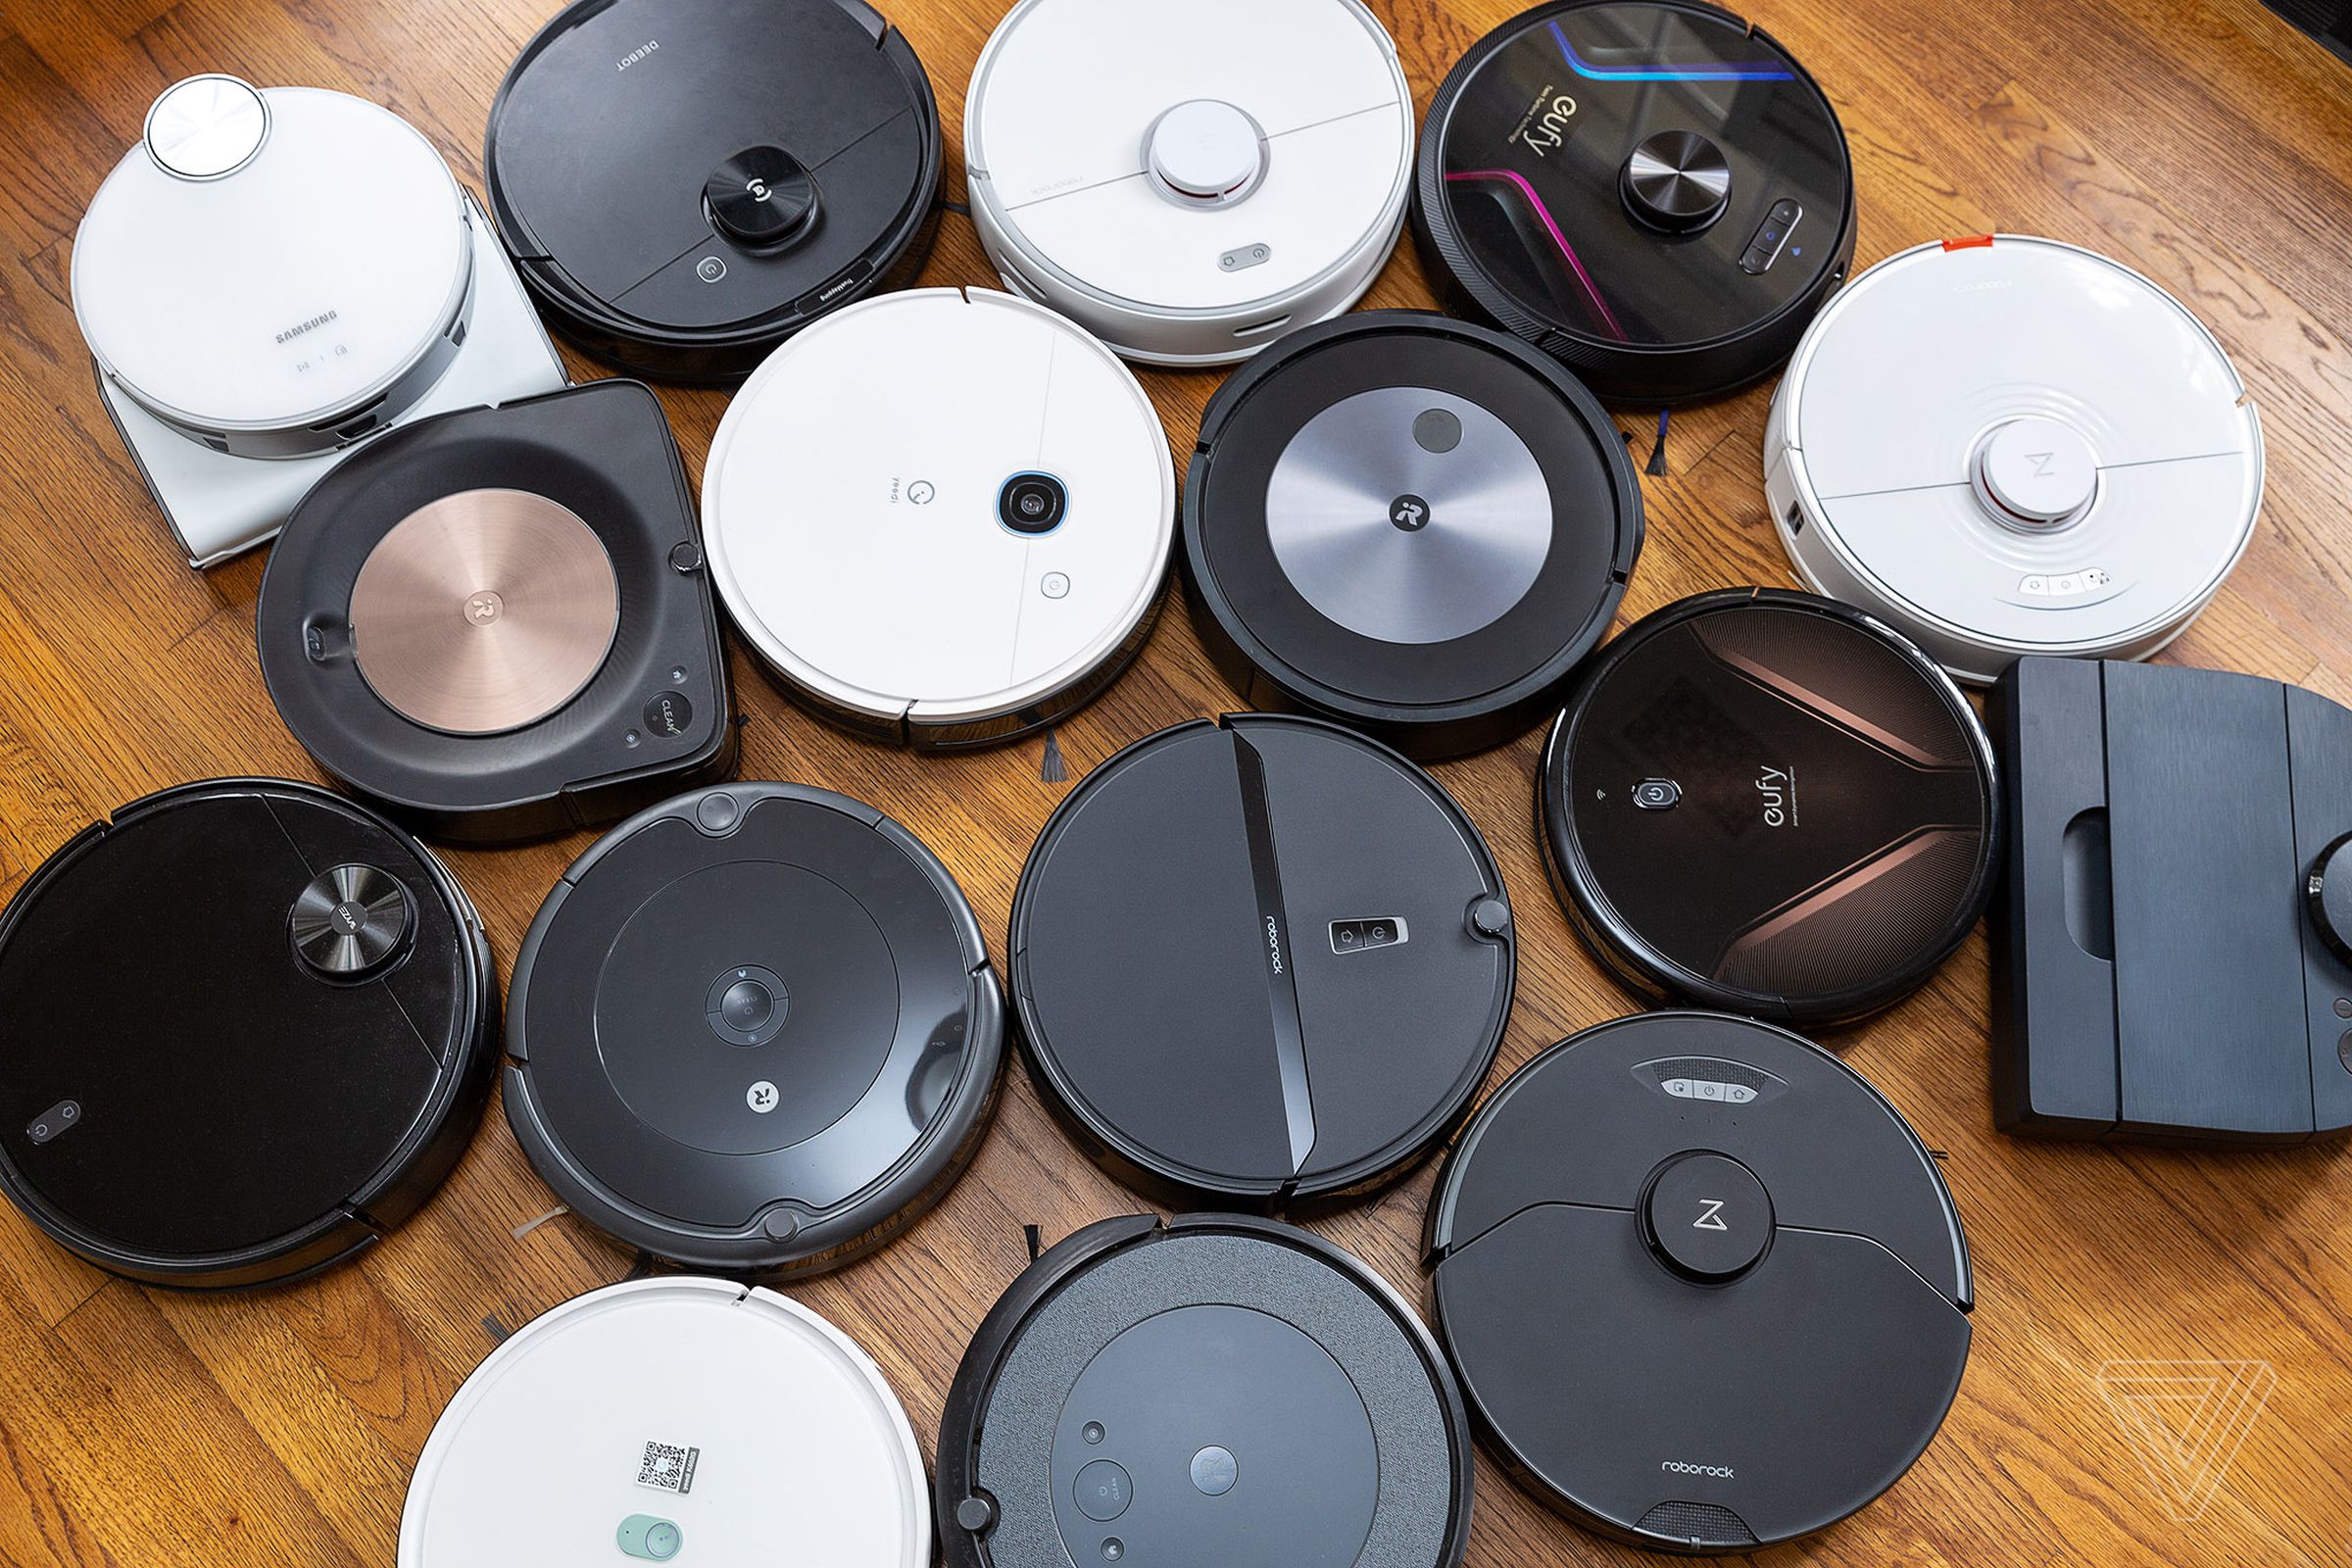 We tested a lot of robot vacuums. Here’s some tips on what to look for when picking your next house cleaner.